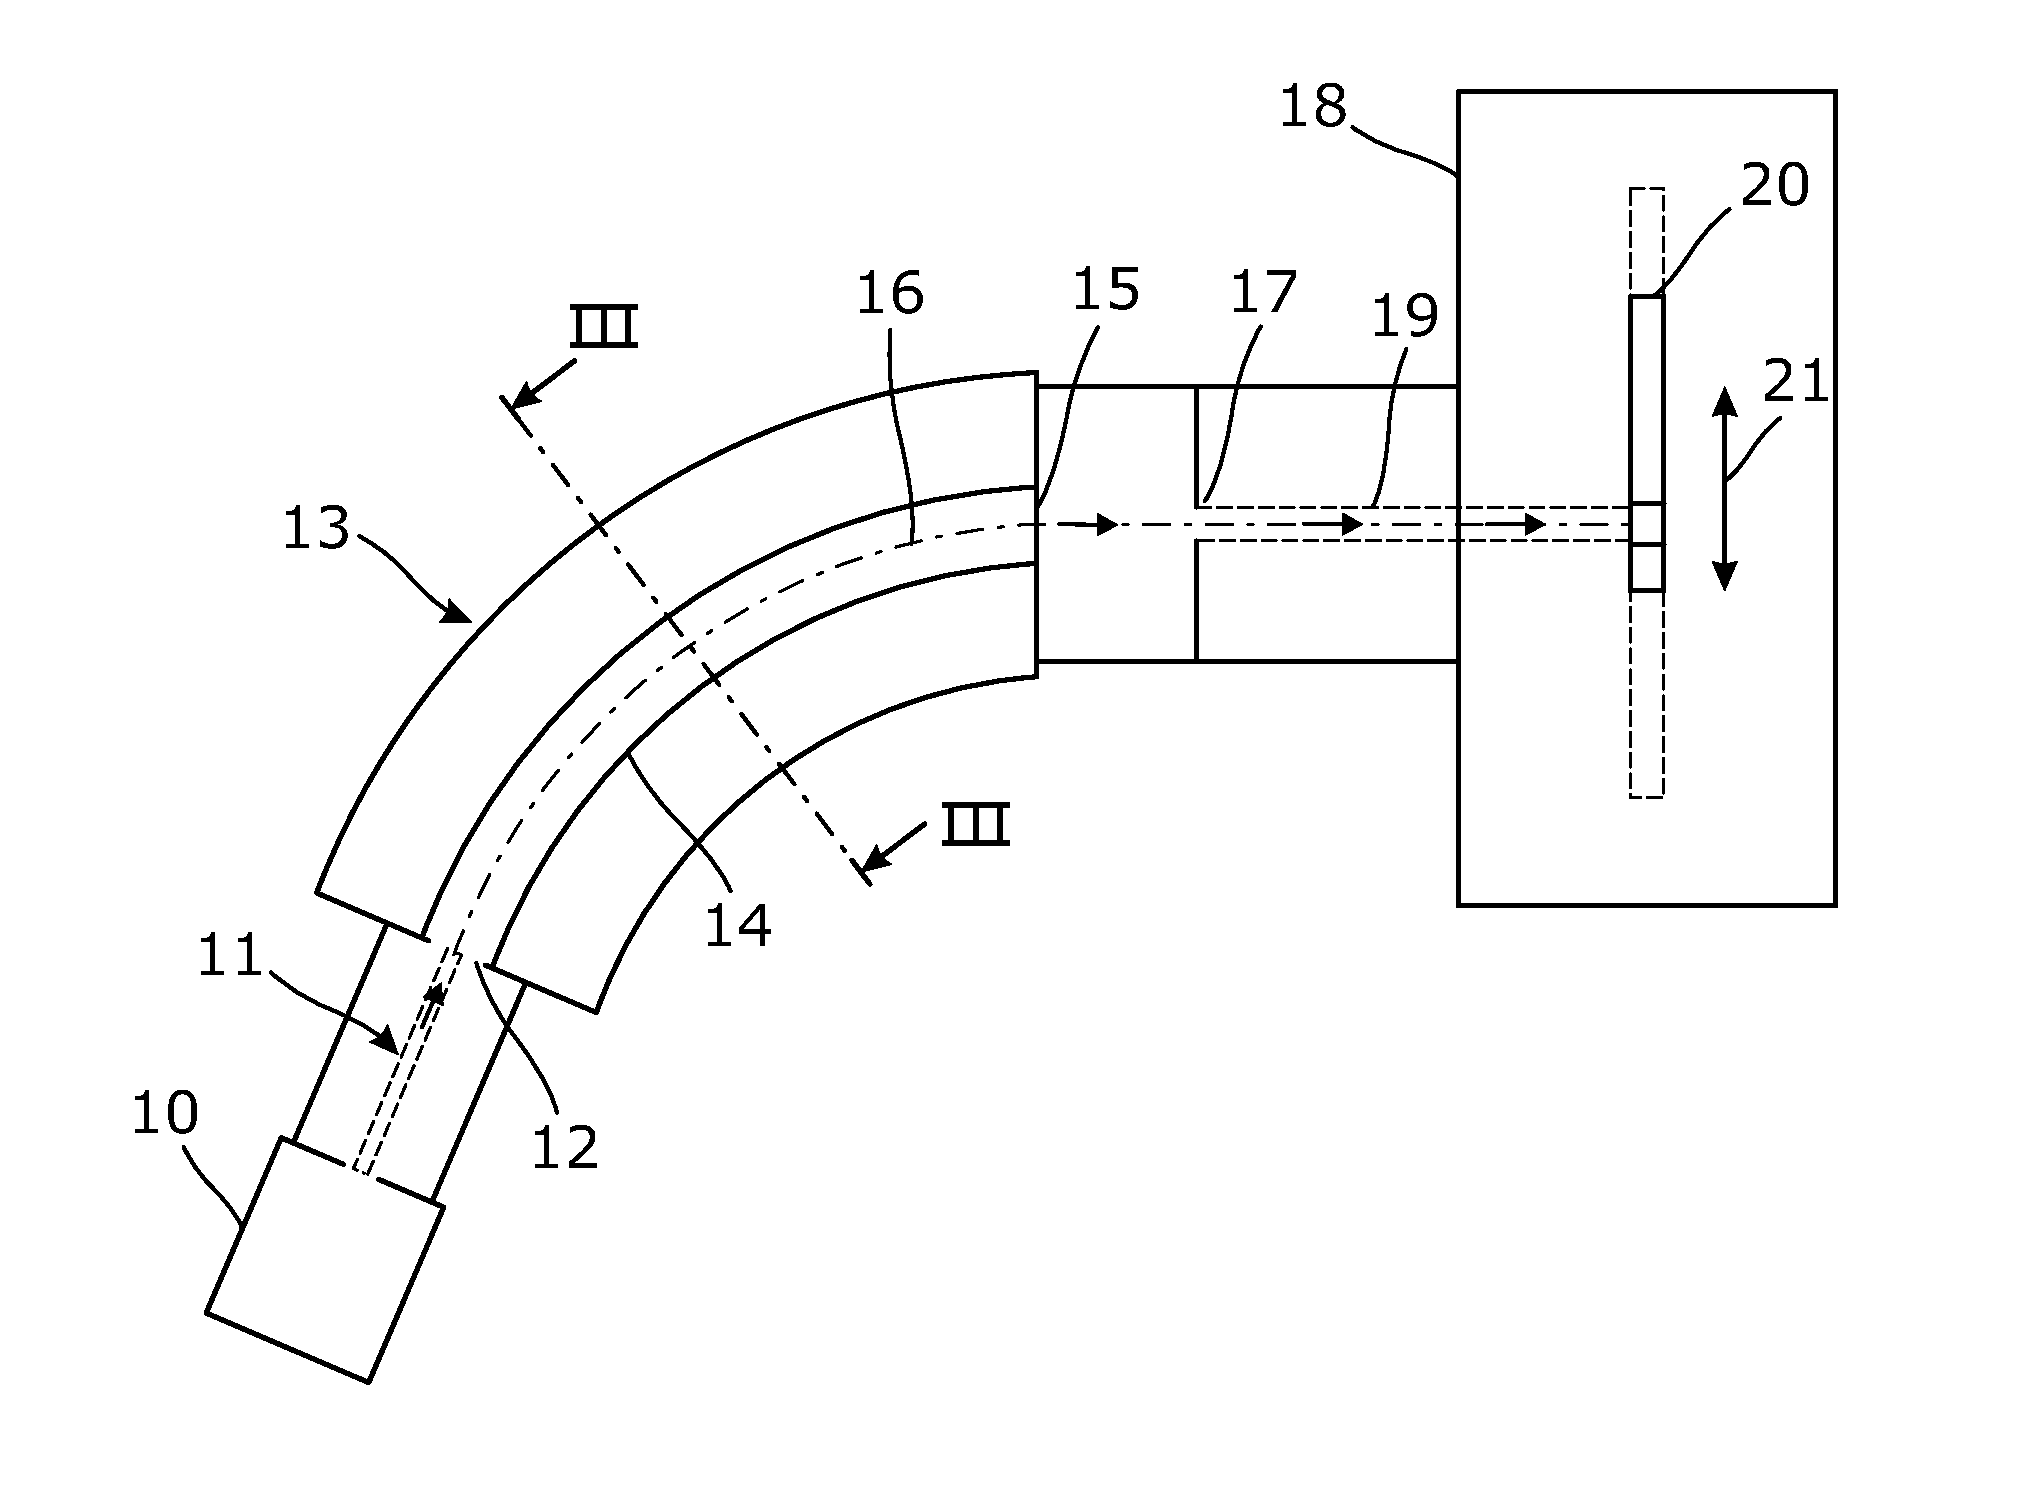 Ion beam bending magnet for a ribbon-shaped ion beam